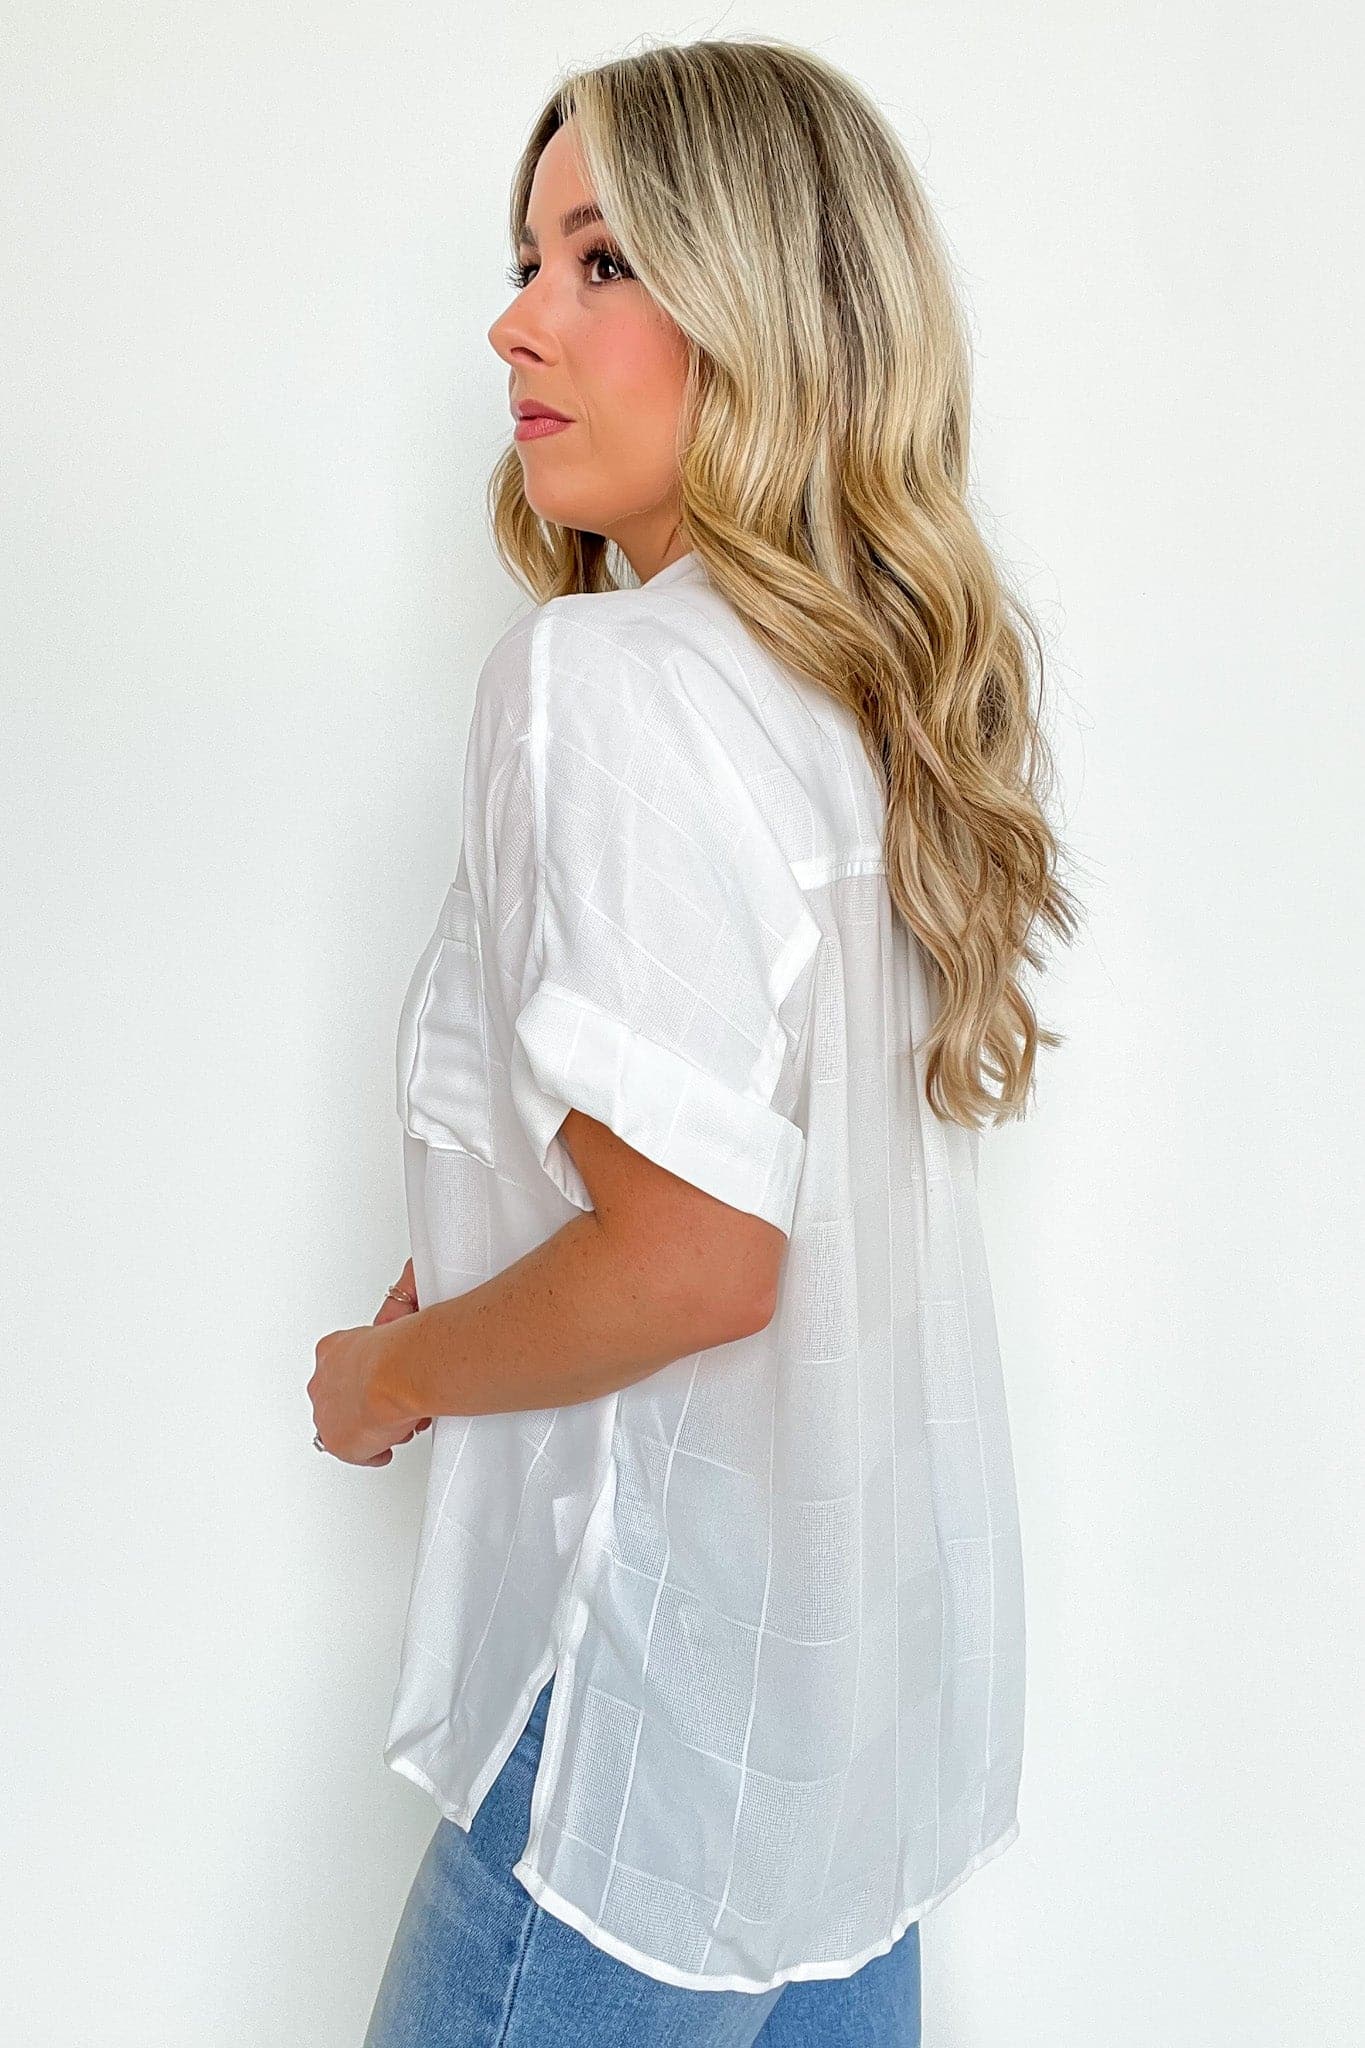  Pierson Short Sleeve Button Down Pocket Top - FINAL SALE - Madison and Mallory